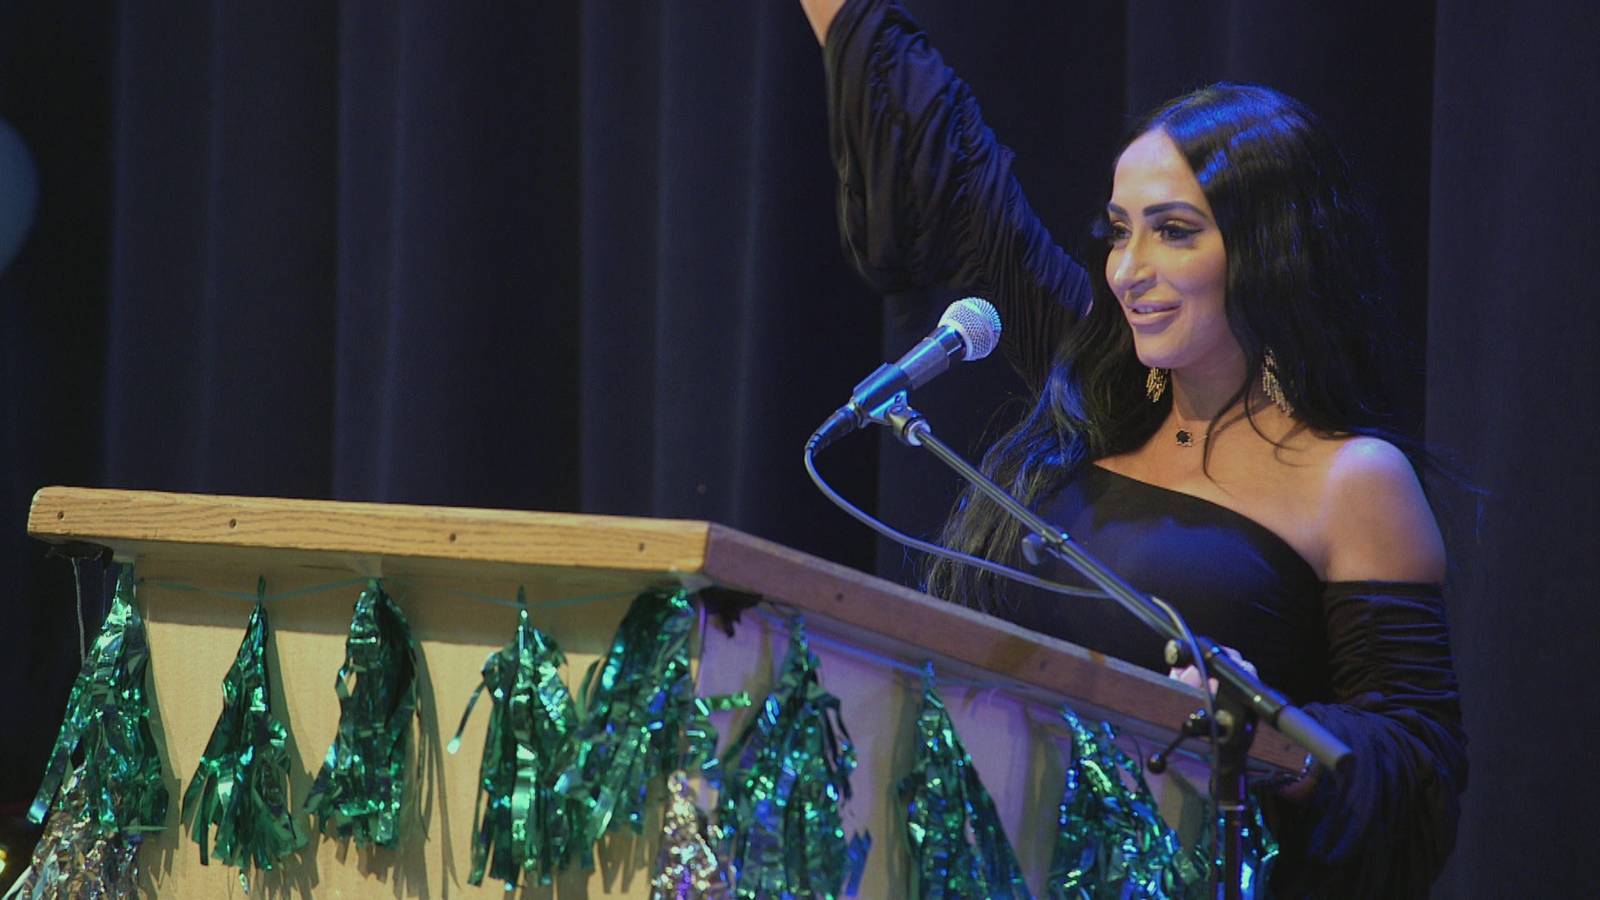 Angelina Pivarnick at the podium giving her speech at Jenni 'JWoww' Farley's birthday party in 'Jersey Shore: Family Vacation' Season 4